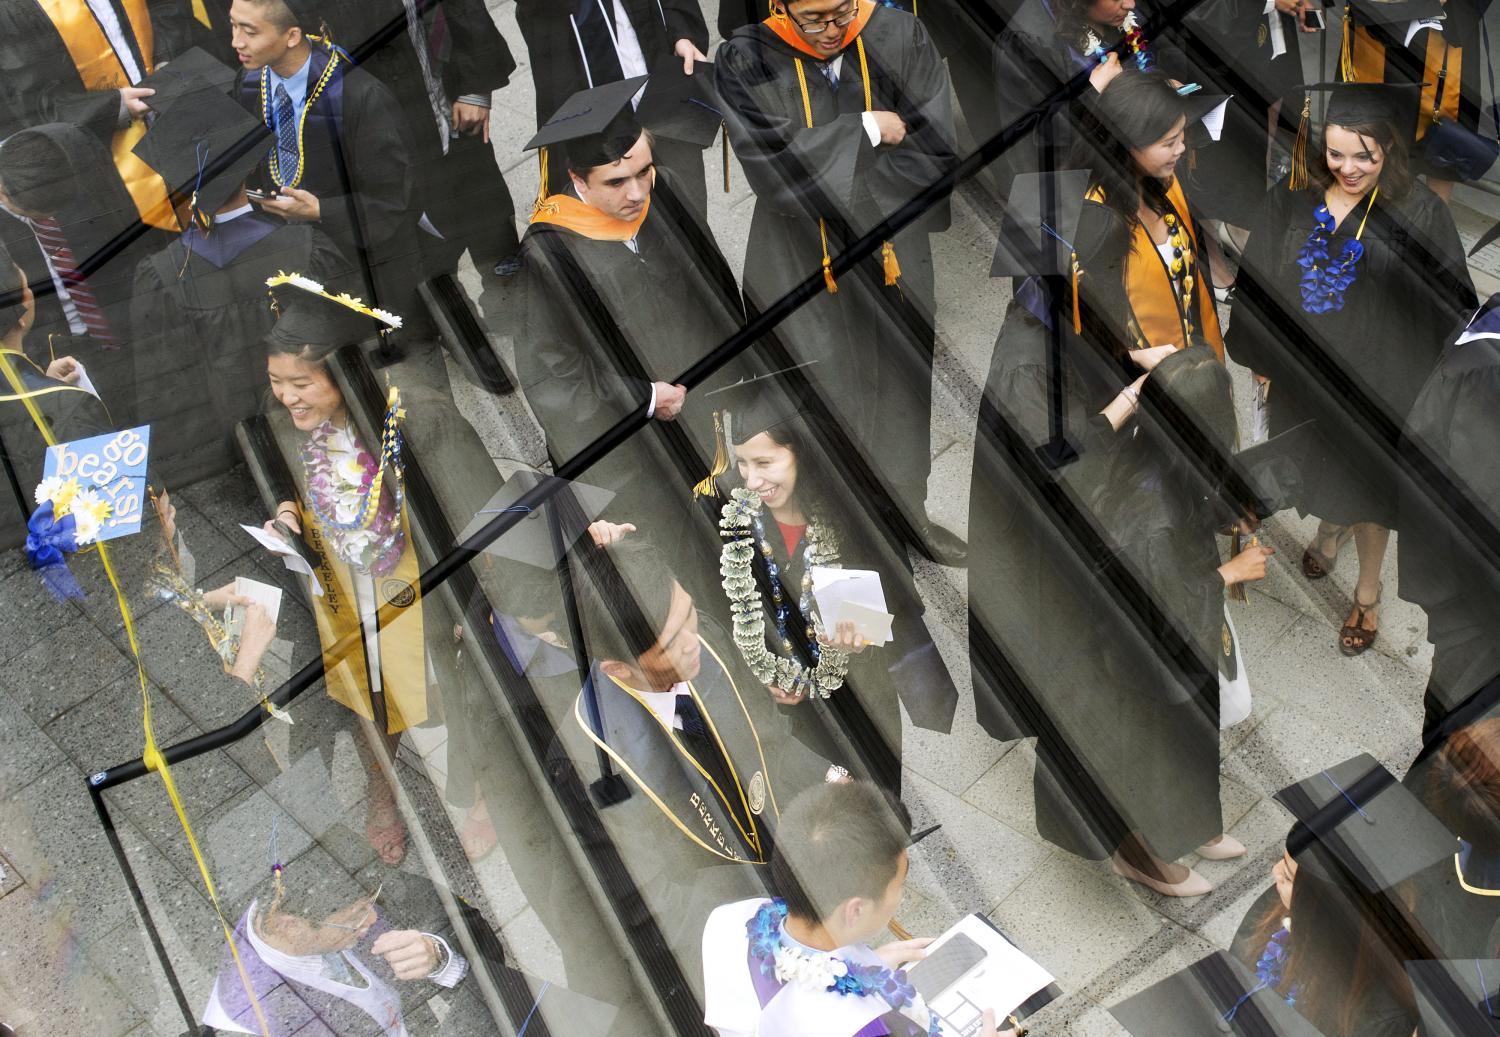 Graduates arrive for commencement at the University of California, Berkeley, in Berkeley, United States May 16, 2015. REUTERS/Noah Berger      TPX IMAGES OF THE DAY      - GF10000097361